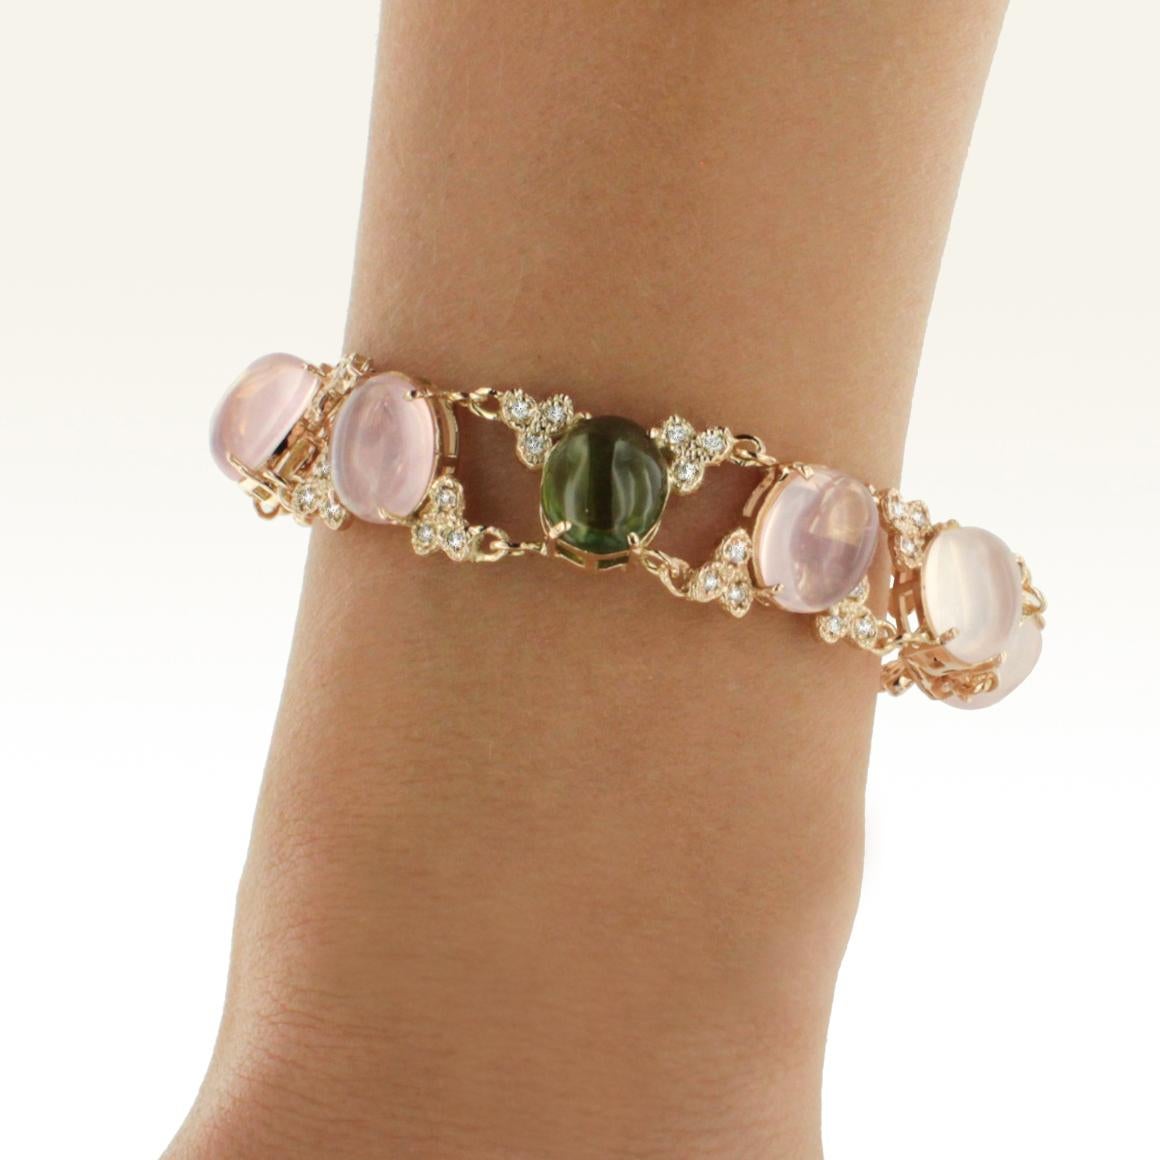  Amazing Bracelet with soft but bright colors, when you wear a Bracelet like this you feel pretty.  Made in Italy by Stanoppi Jewellery since 1948.
Bracelet in 14k rose gold with pink Quartz (oval cabochon cut, size: 10x12 mm), Peridot (oval